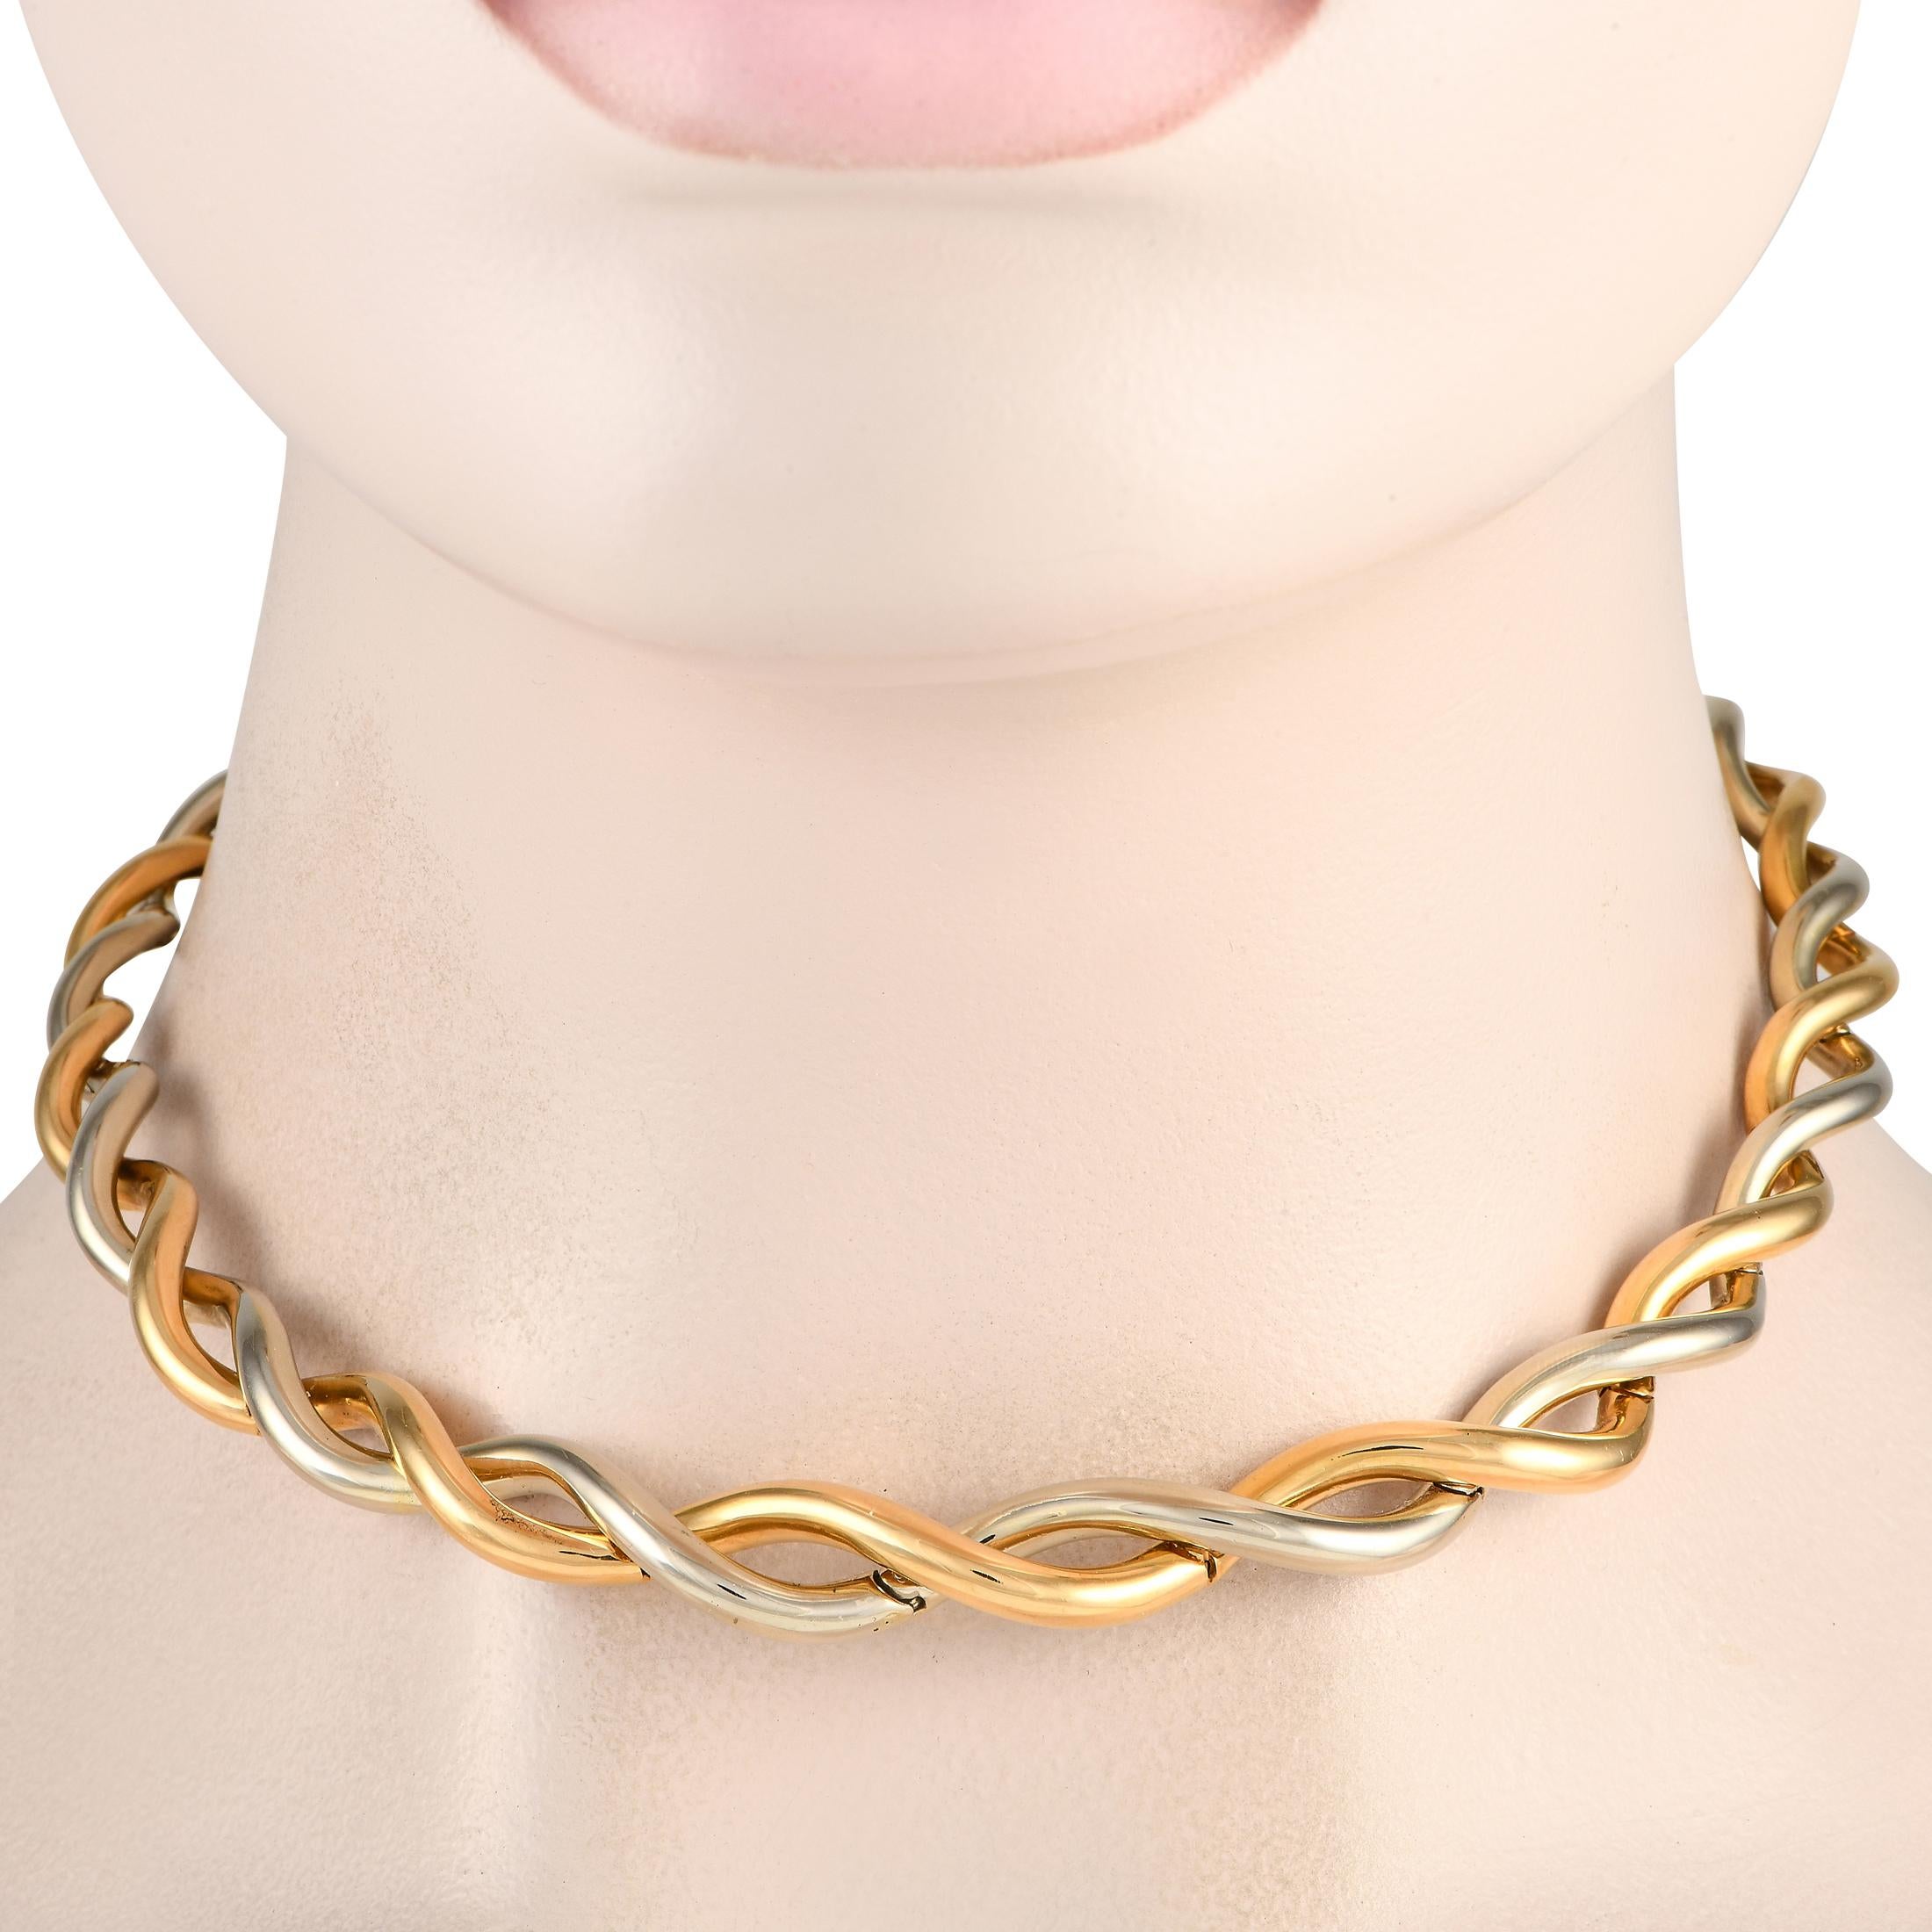 Count on this Van Cleef & Arpels necklace to give any outfit the lift it needs. It features two chunky and curvy cords, in solid 18K white and yellow gold, that twist and overlap. This choker-style necklace sits close to the neck and has a box tab